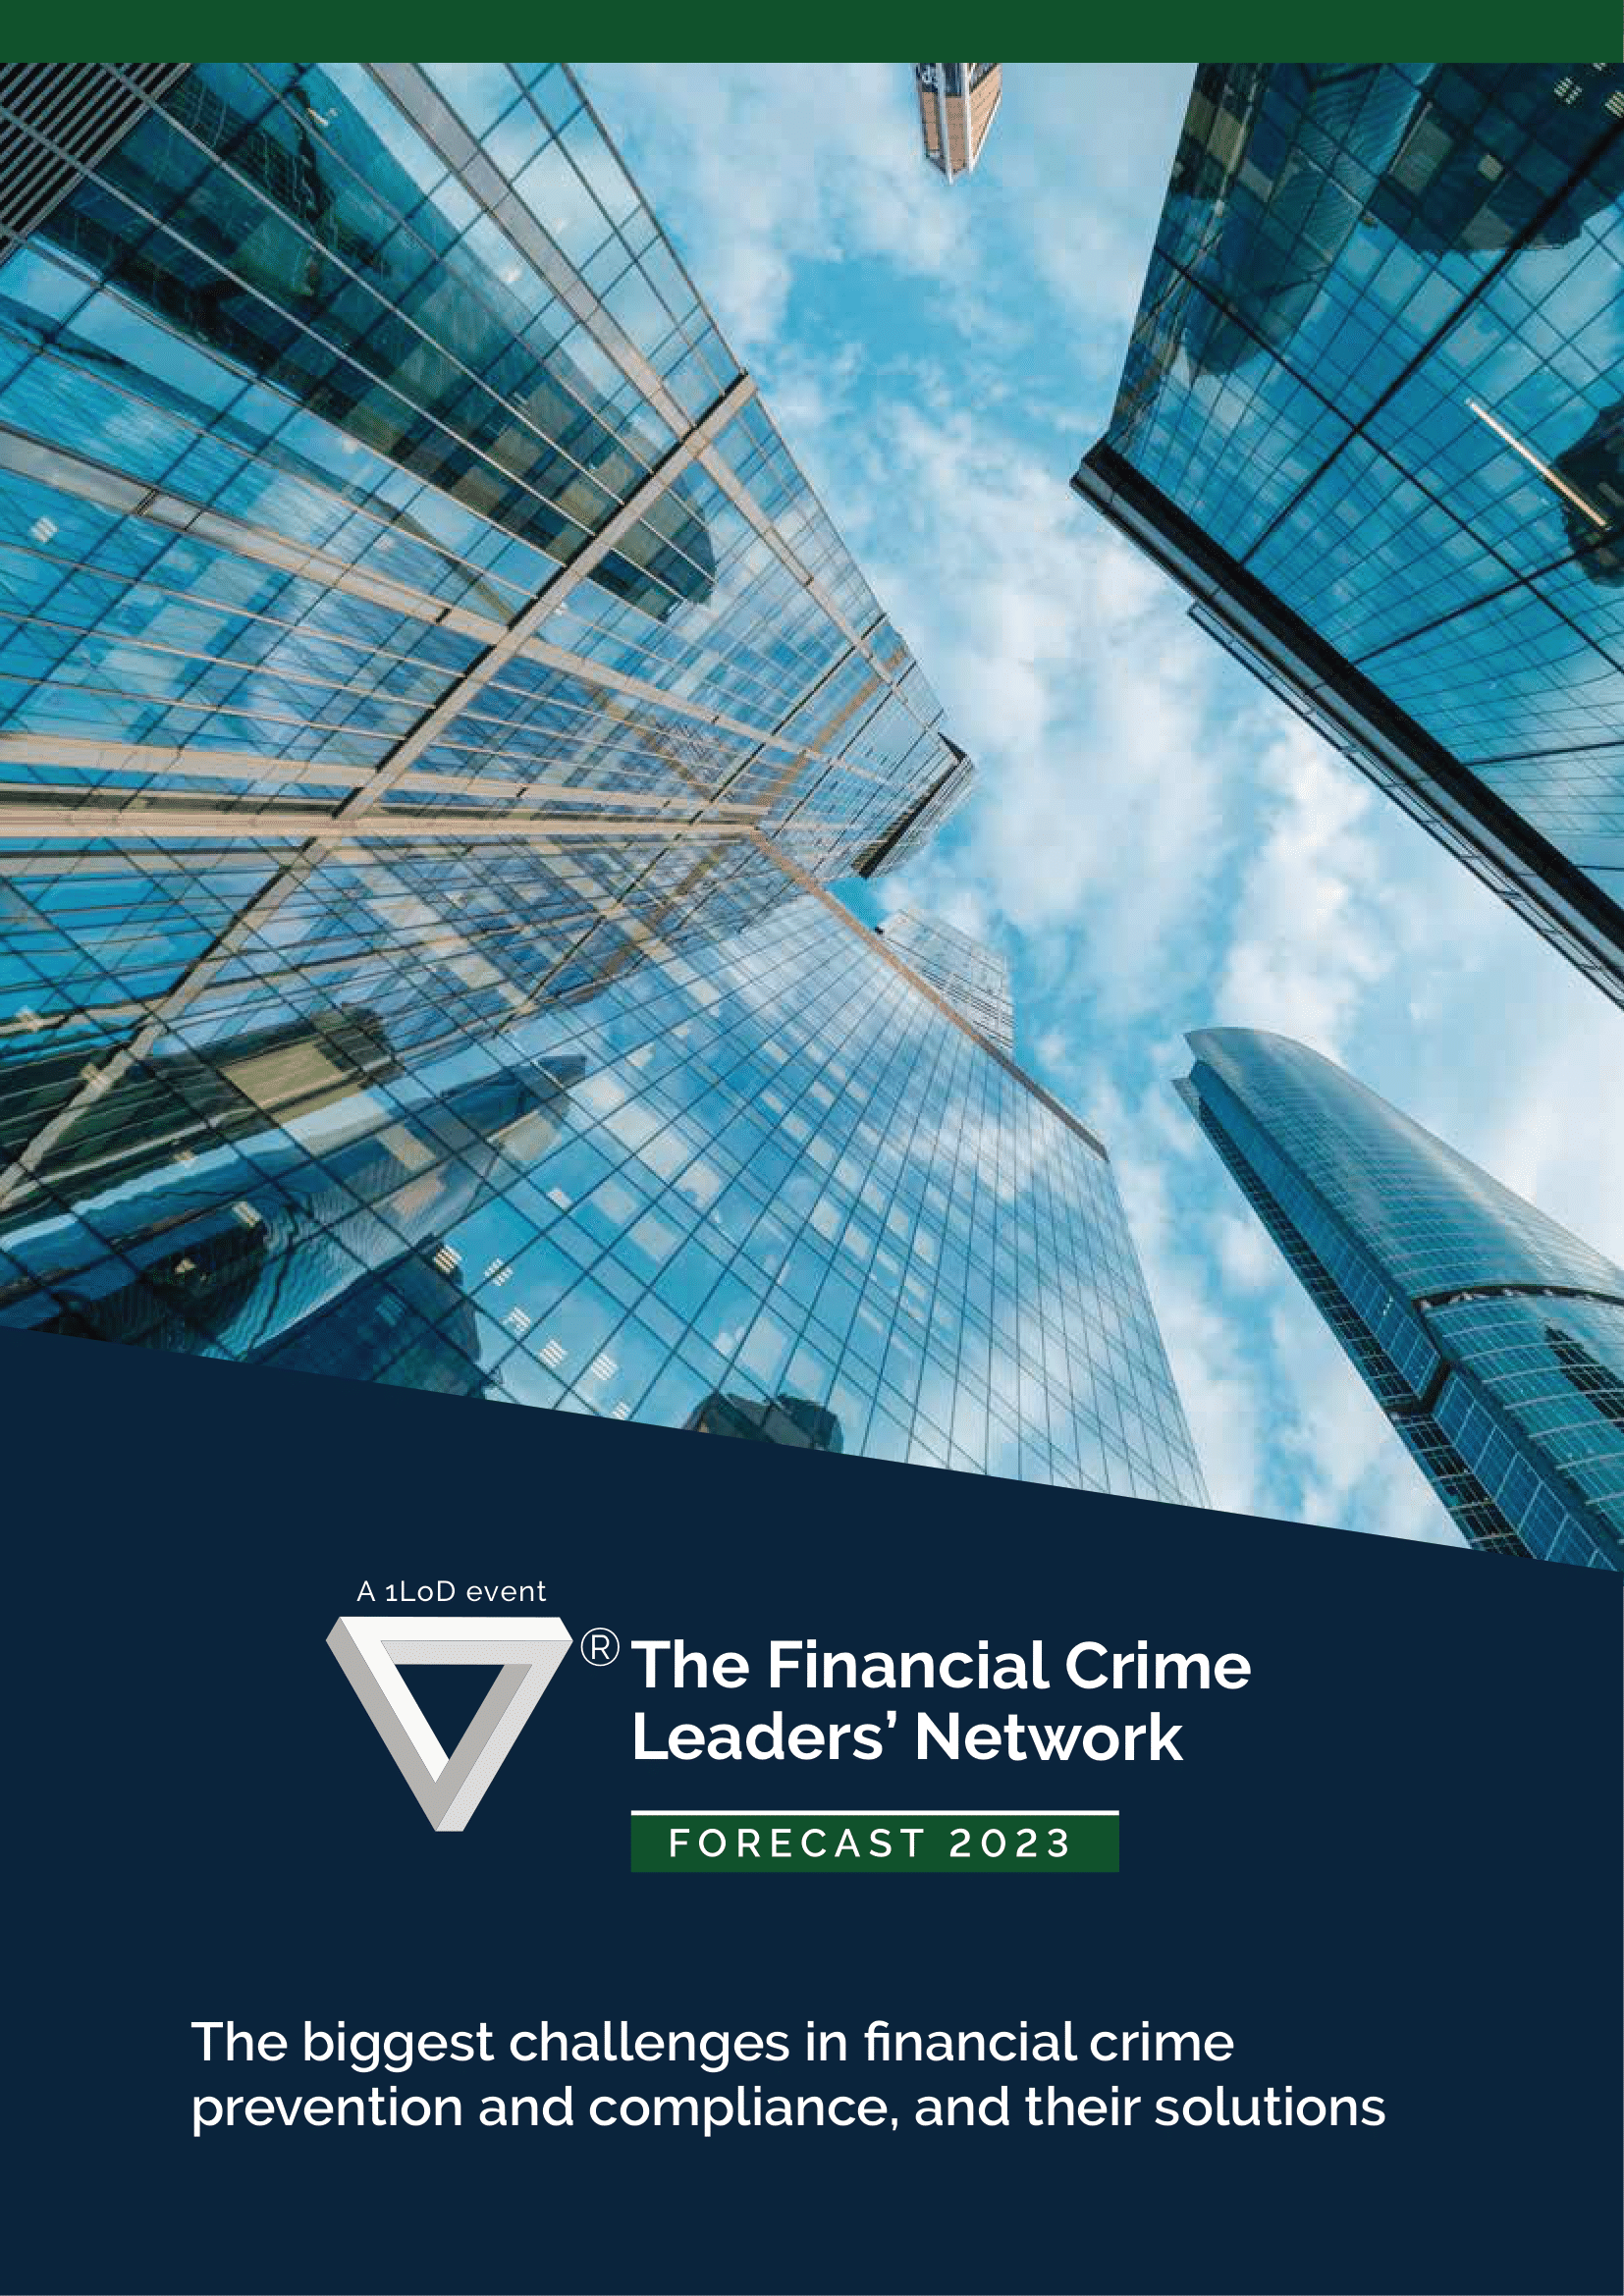 The biggest challenges in financial crime prevention and compliance, and their solutions